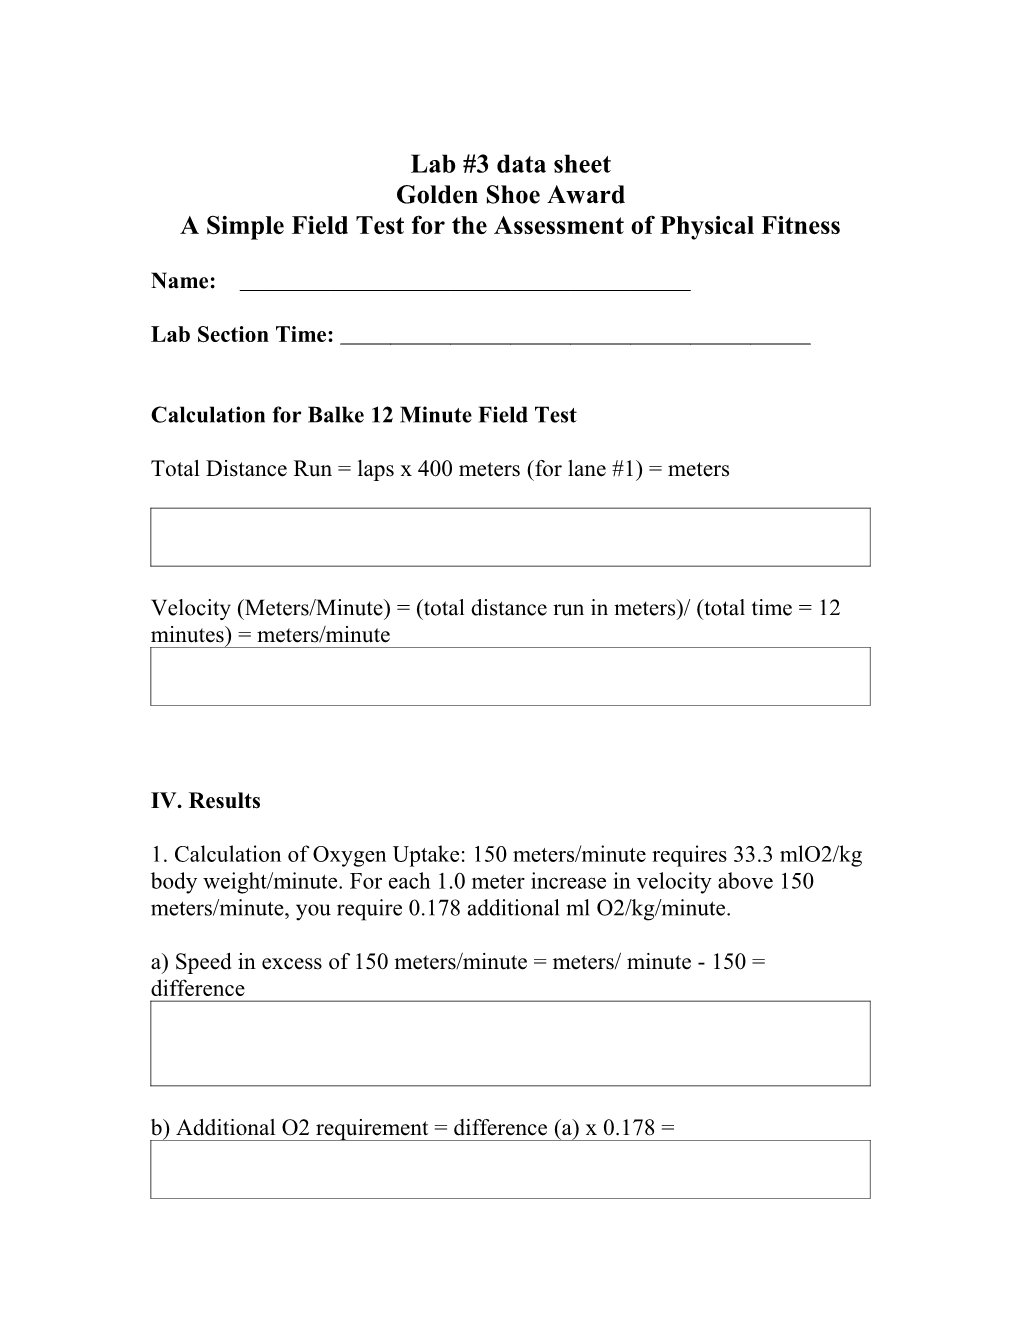 A Simple Field Test for the Assessment of Physical Fitness